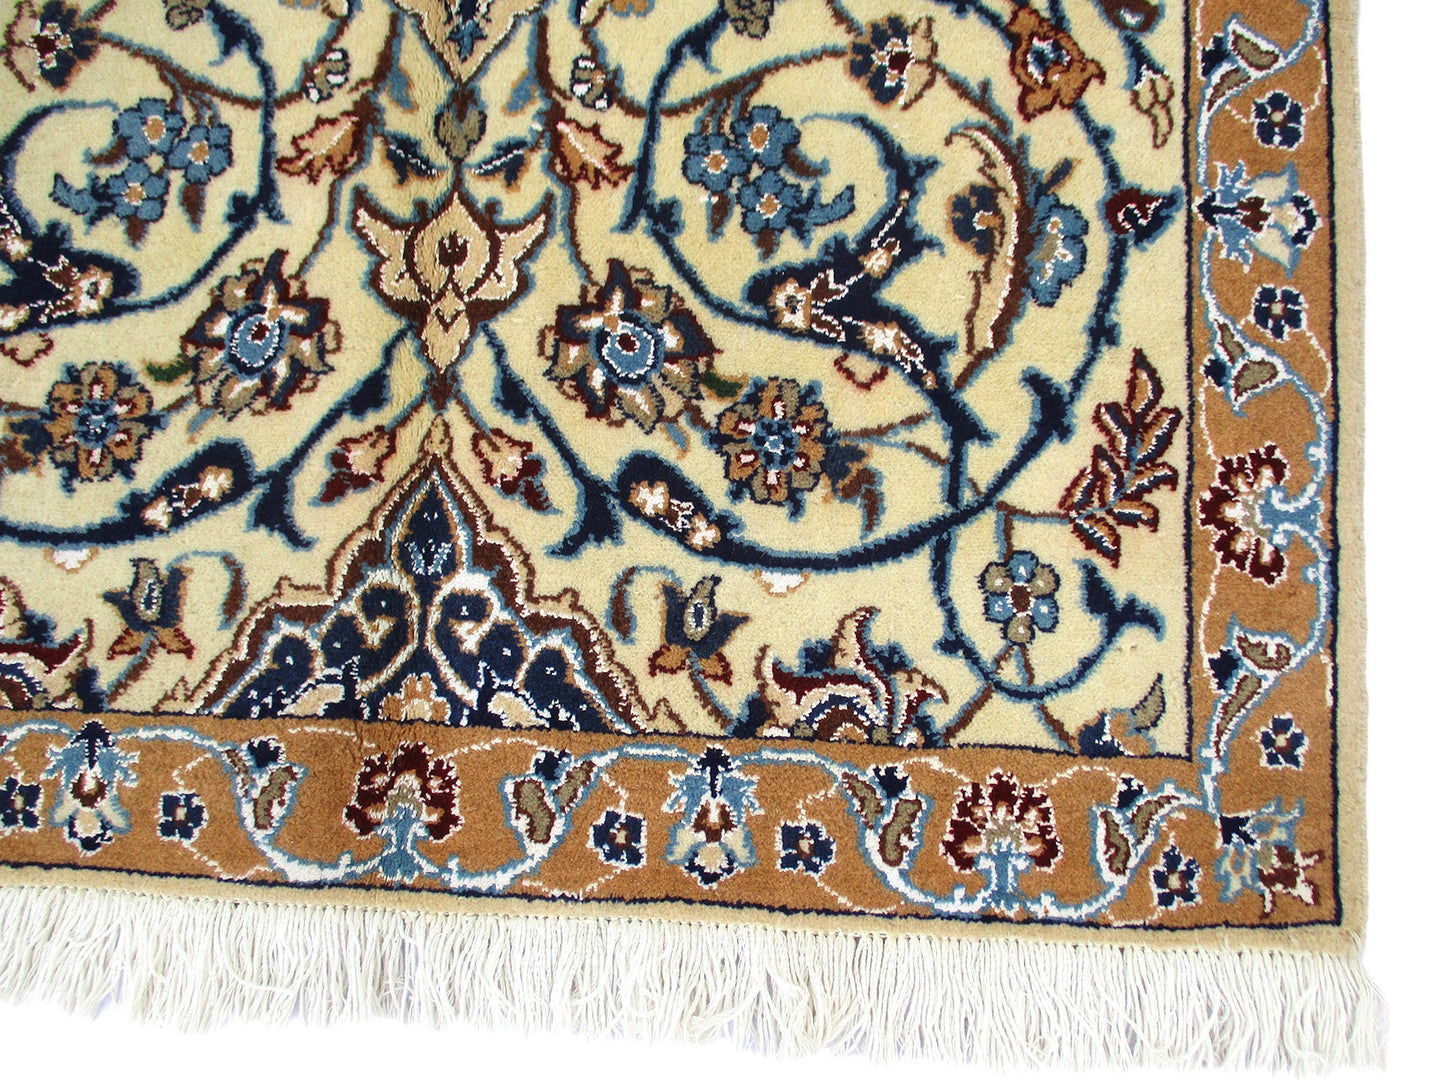 3 x 4 Feet Beige Blue Turkish Caucasian Rug | Hand Woven Area Rug | Oriental Persian Rug | Living Room Rug | Accent Floral Pattern Wool Rug